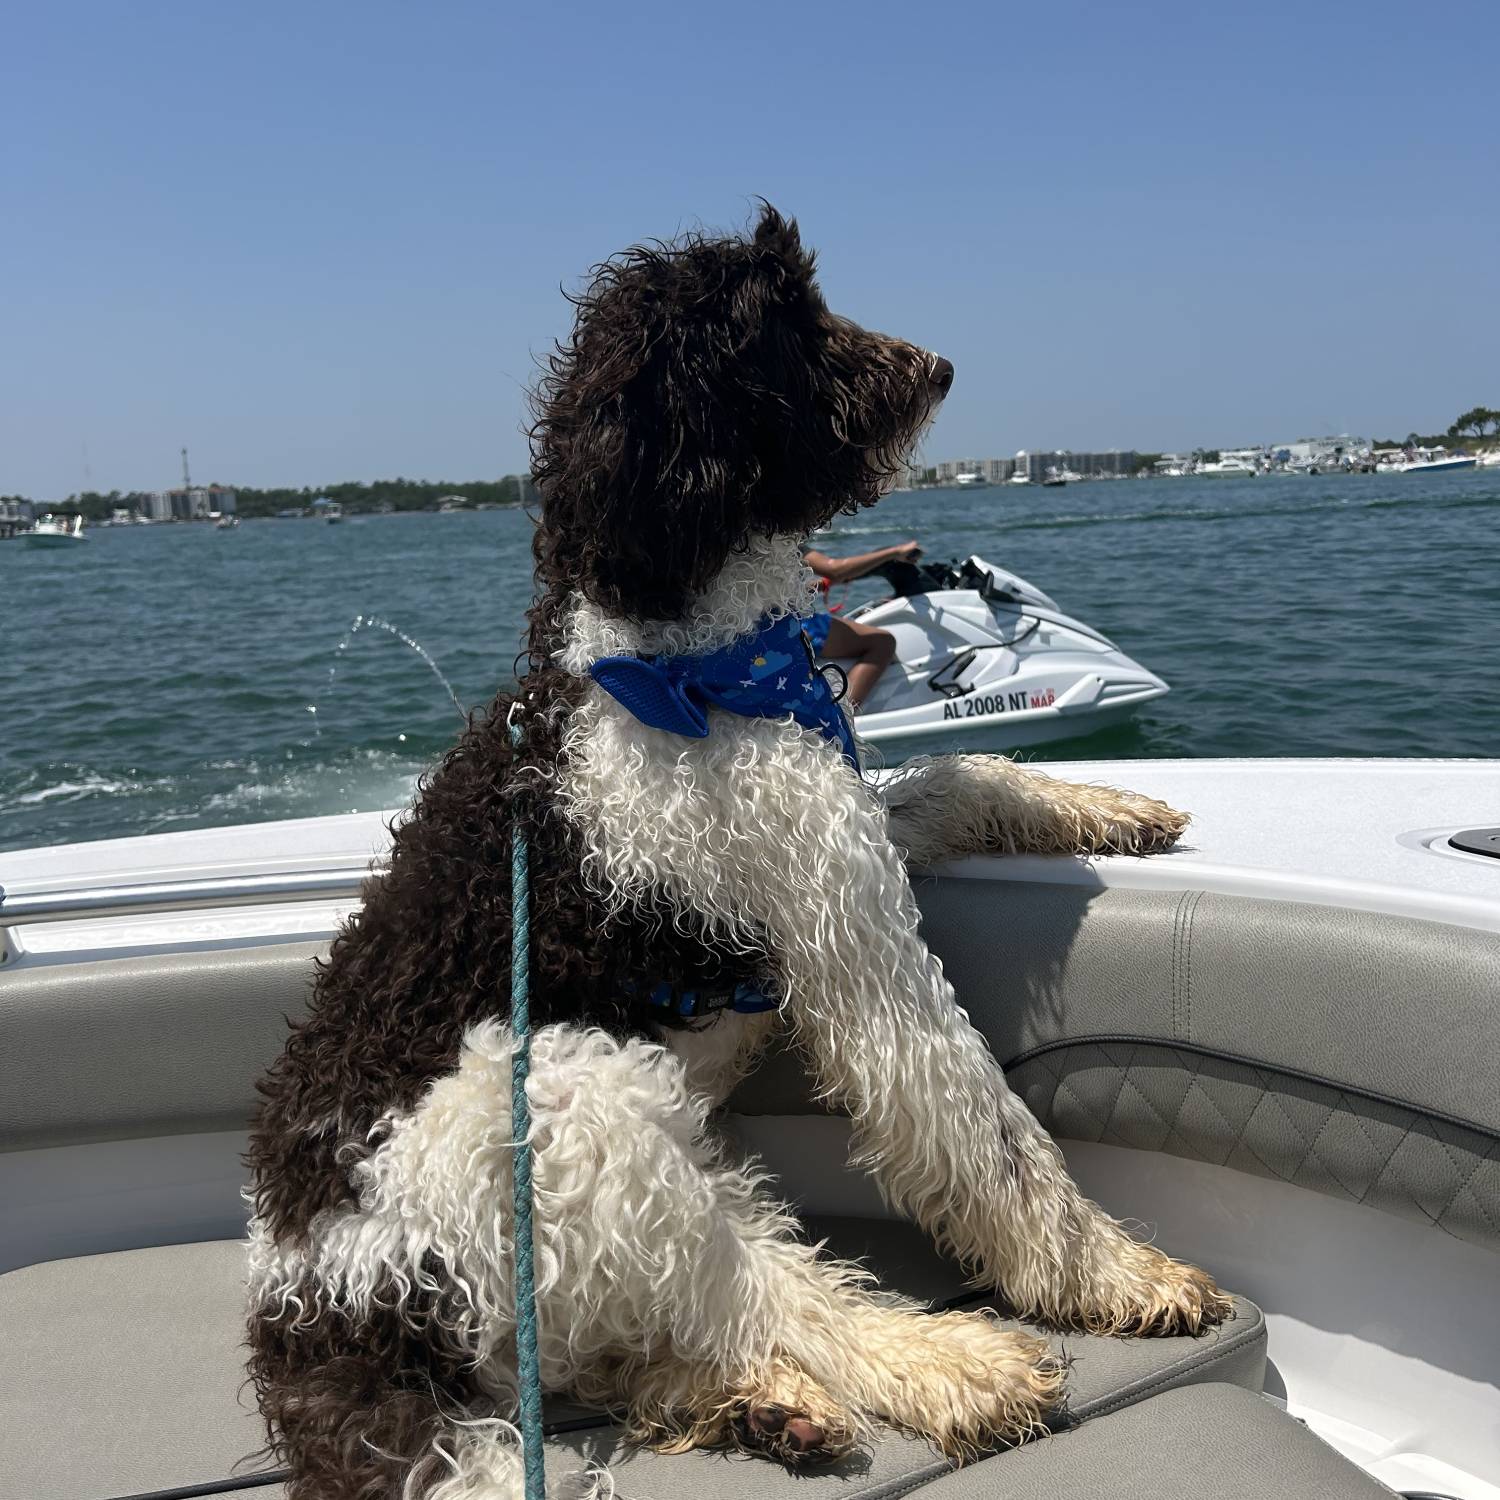 Izzy’s first day on the boat.